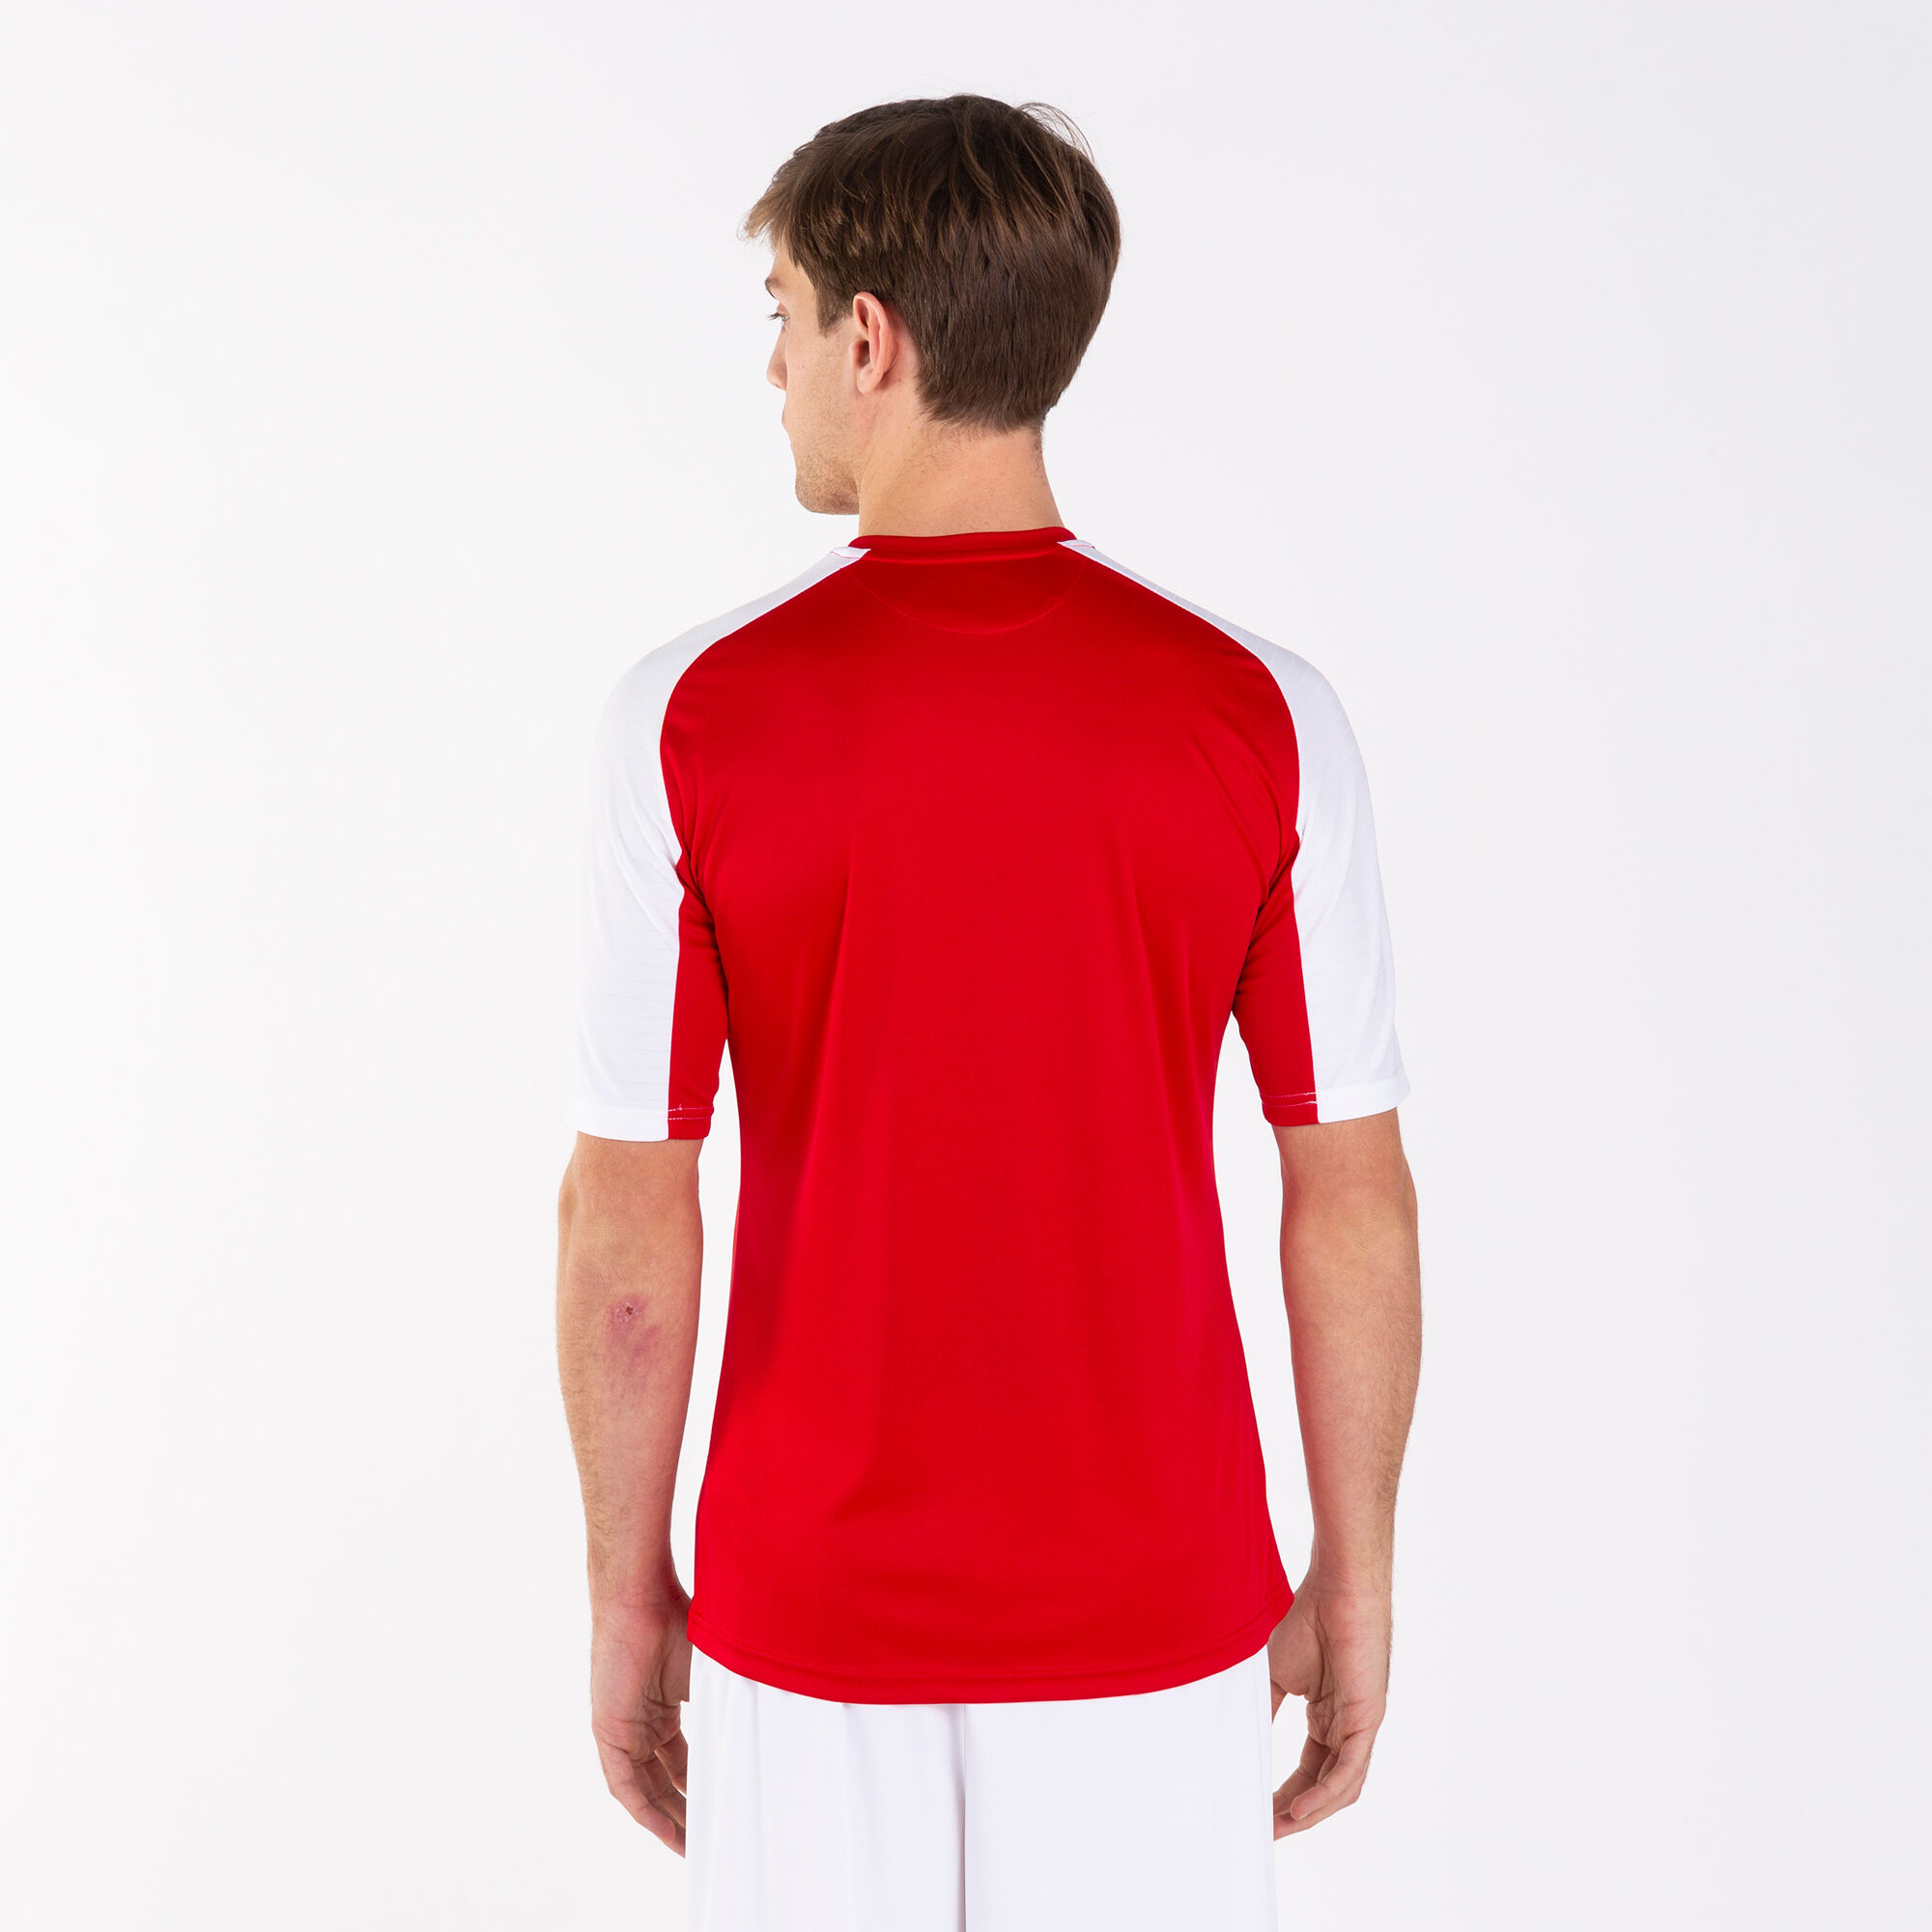 MAILLOT MANCHES COURTES HOMME ESSENTIAL ROUGE BLANC